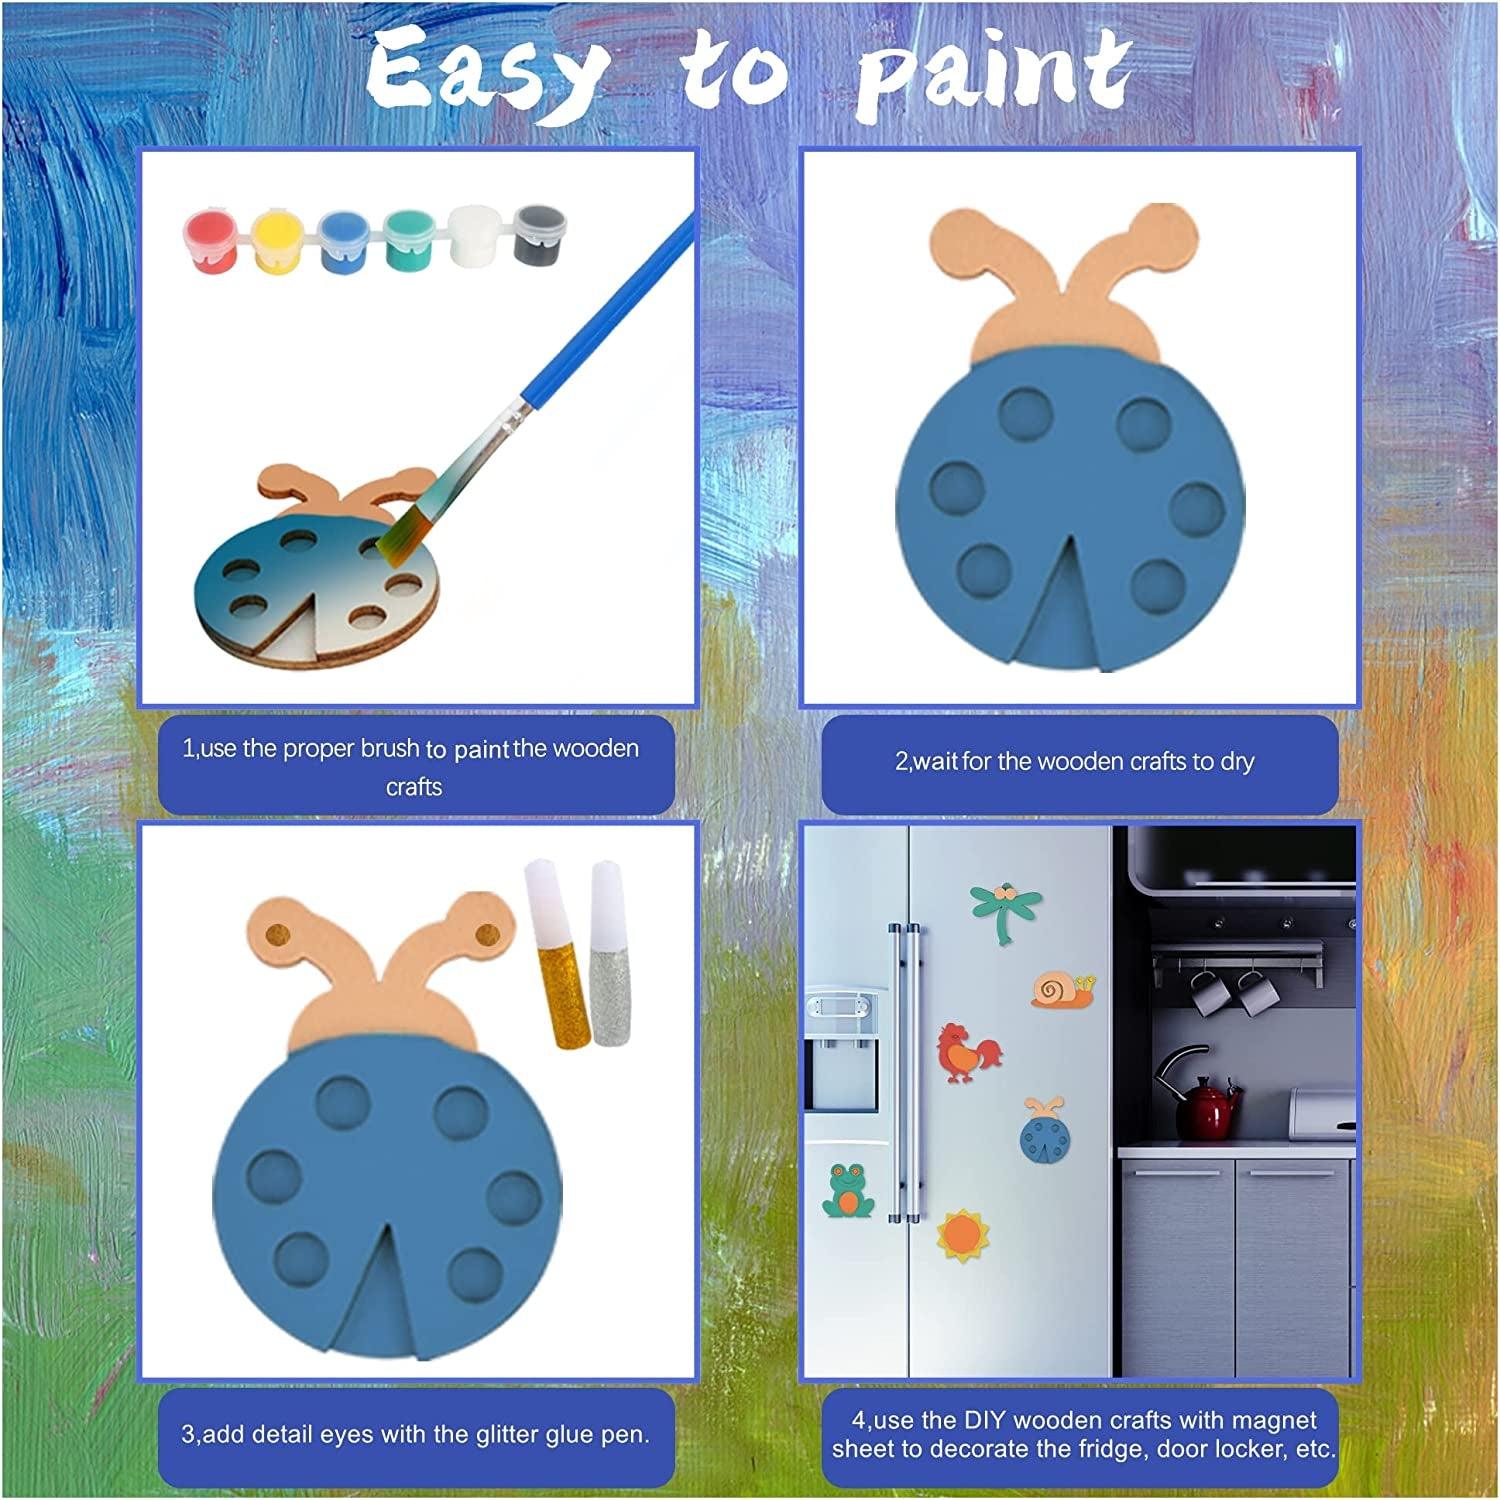 JOYIN 12 Wooden Magnet Creativity Arts & Crafts Painting Kit for Kids, Decorate Your Own Painting Gift, Birthday Parties and Family Crafts, Easter